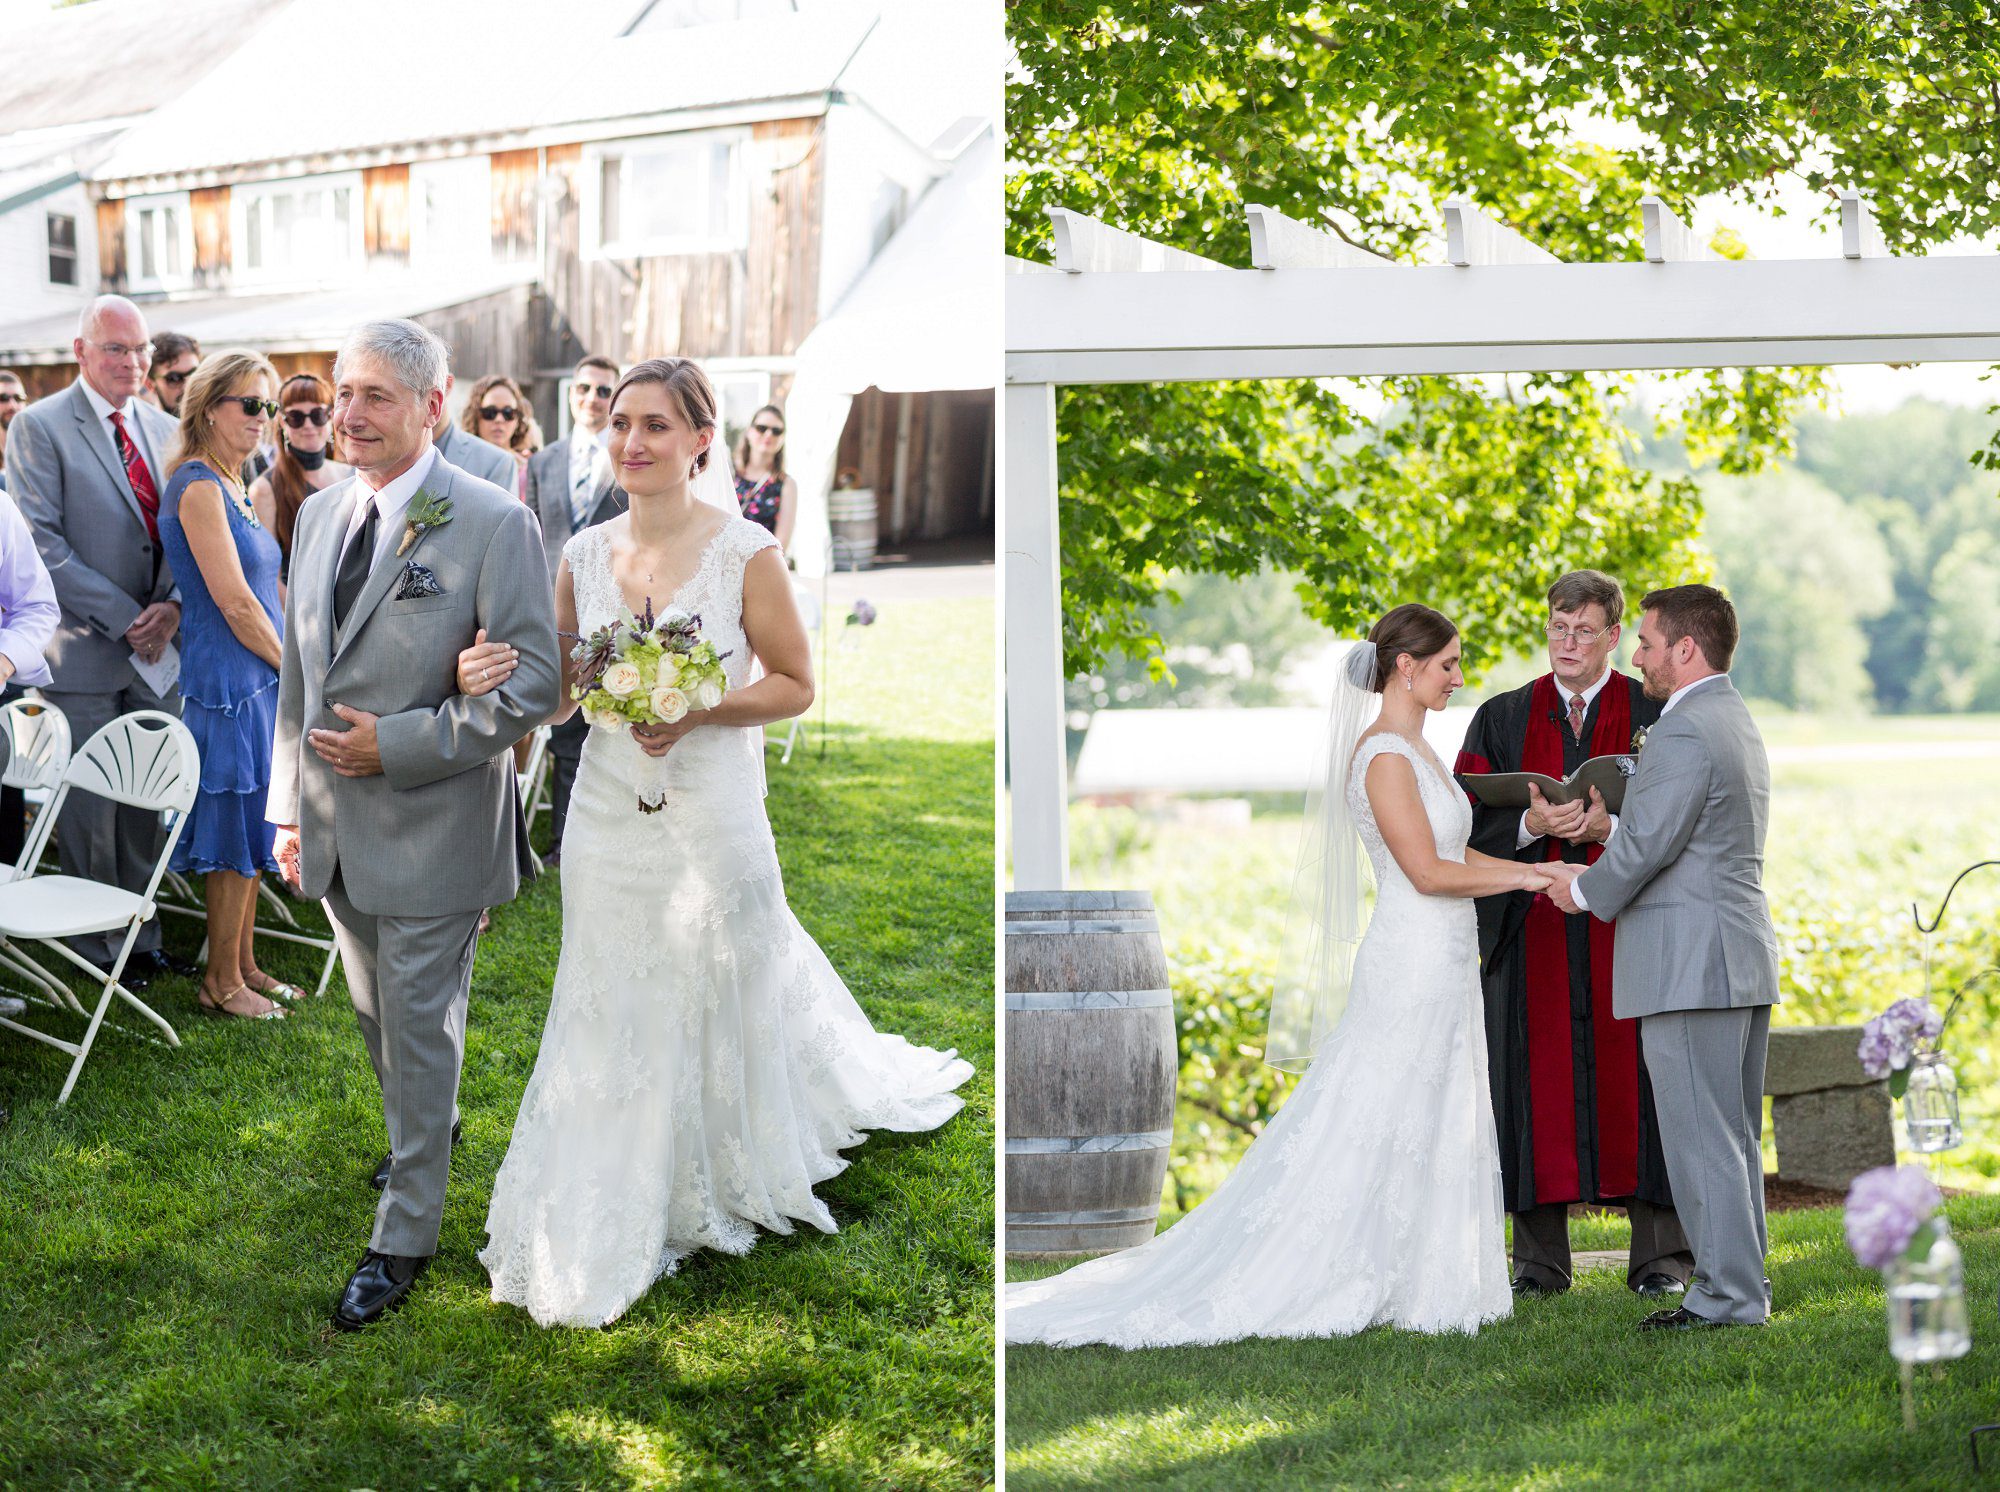 Wedding ceremony at Flag Hill Winery in Lee, NH